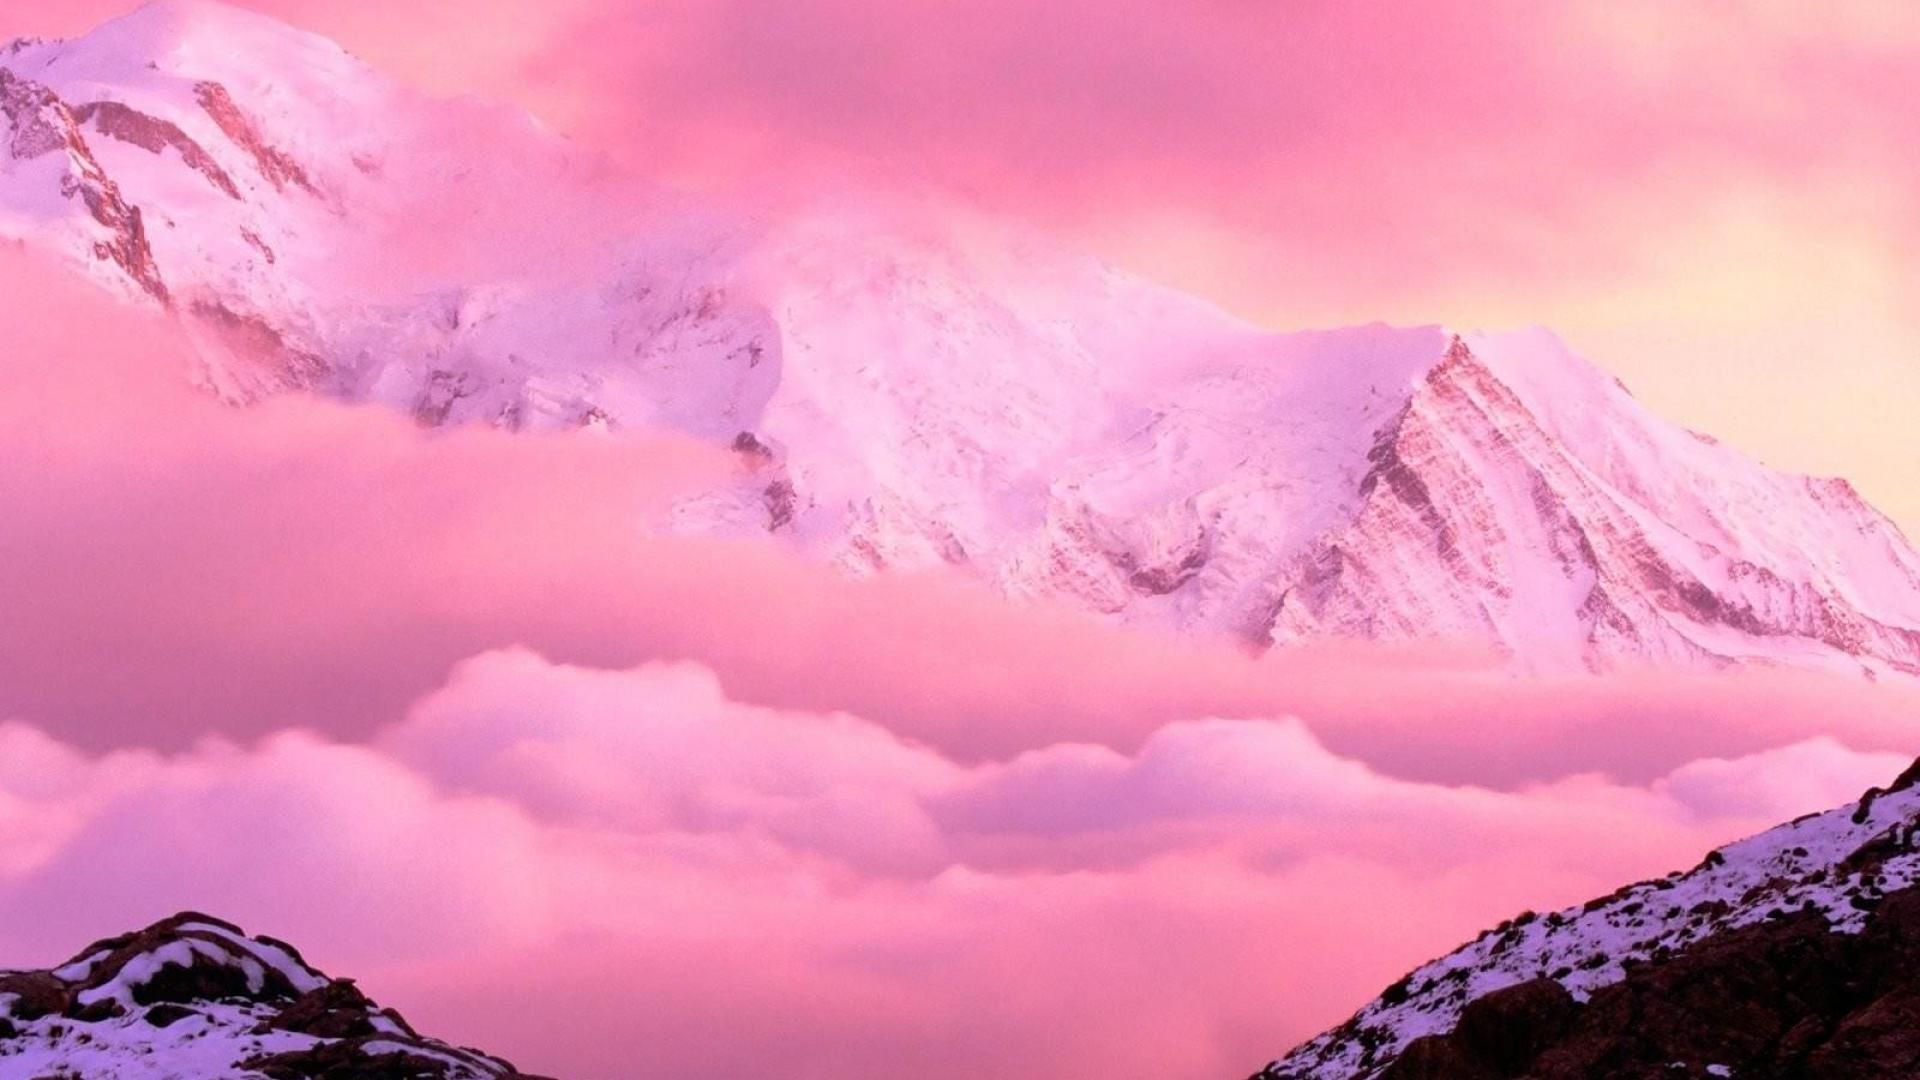 Pink Aesthetic Landscape Wallpapers